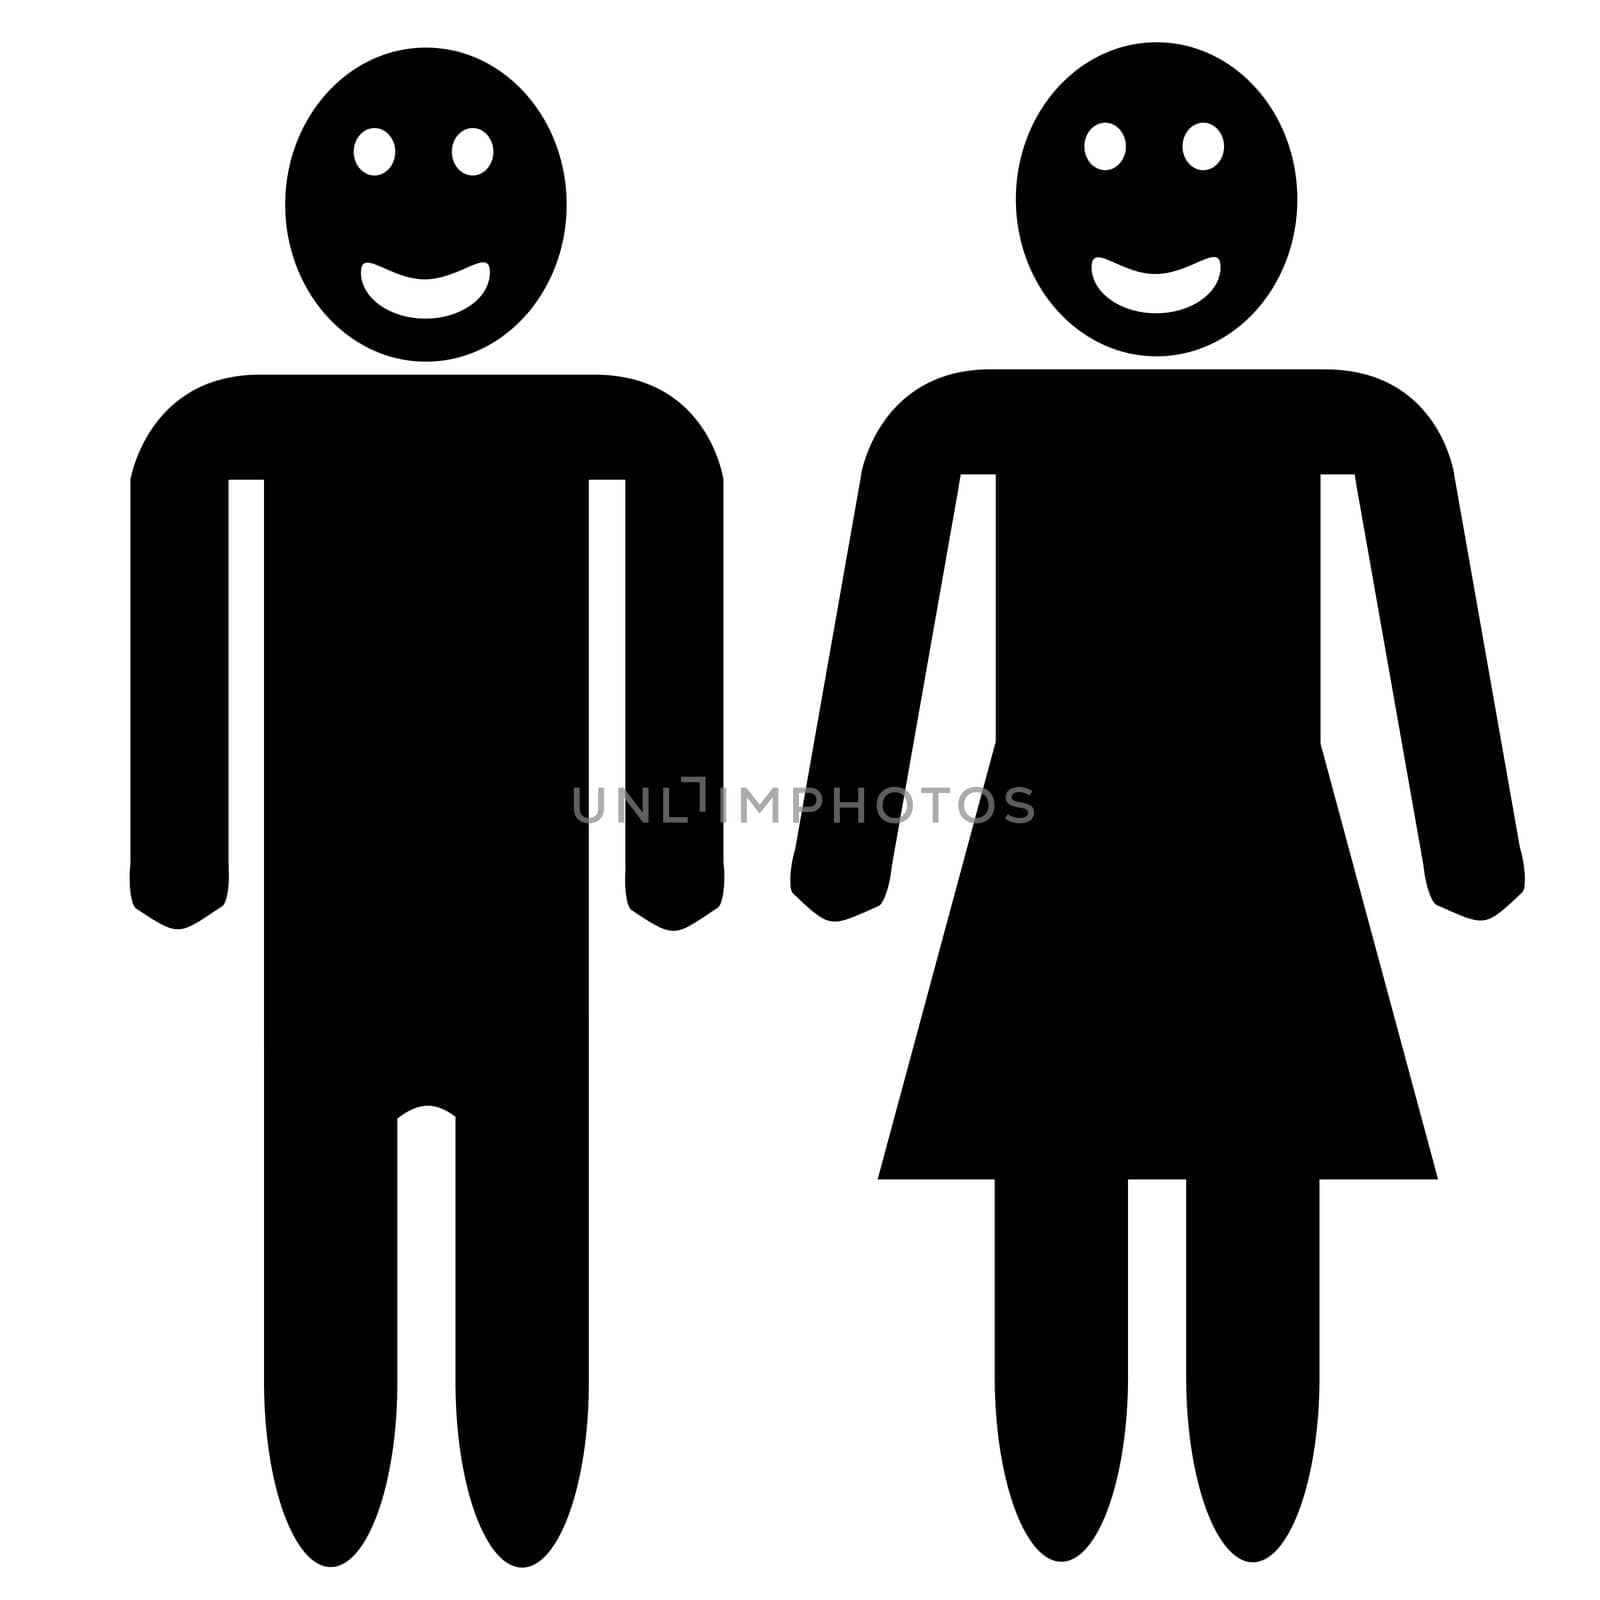 Man and woman silhouette - smiling faces by robbino